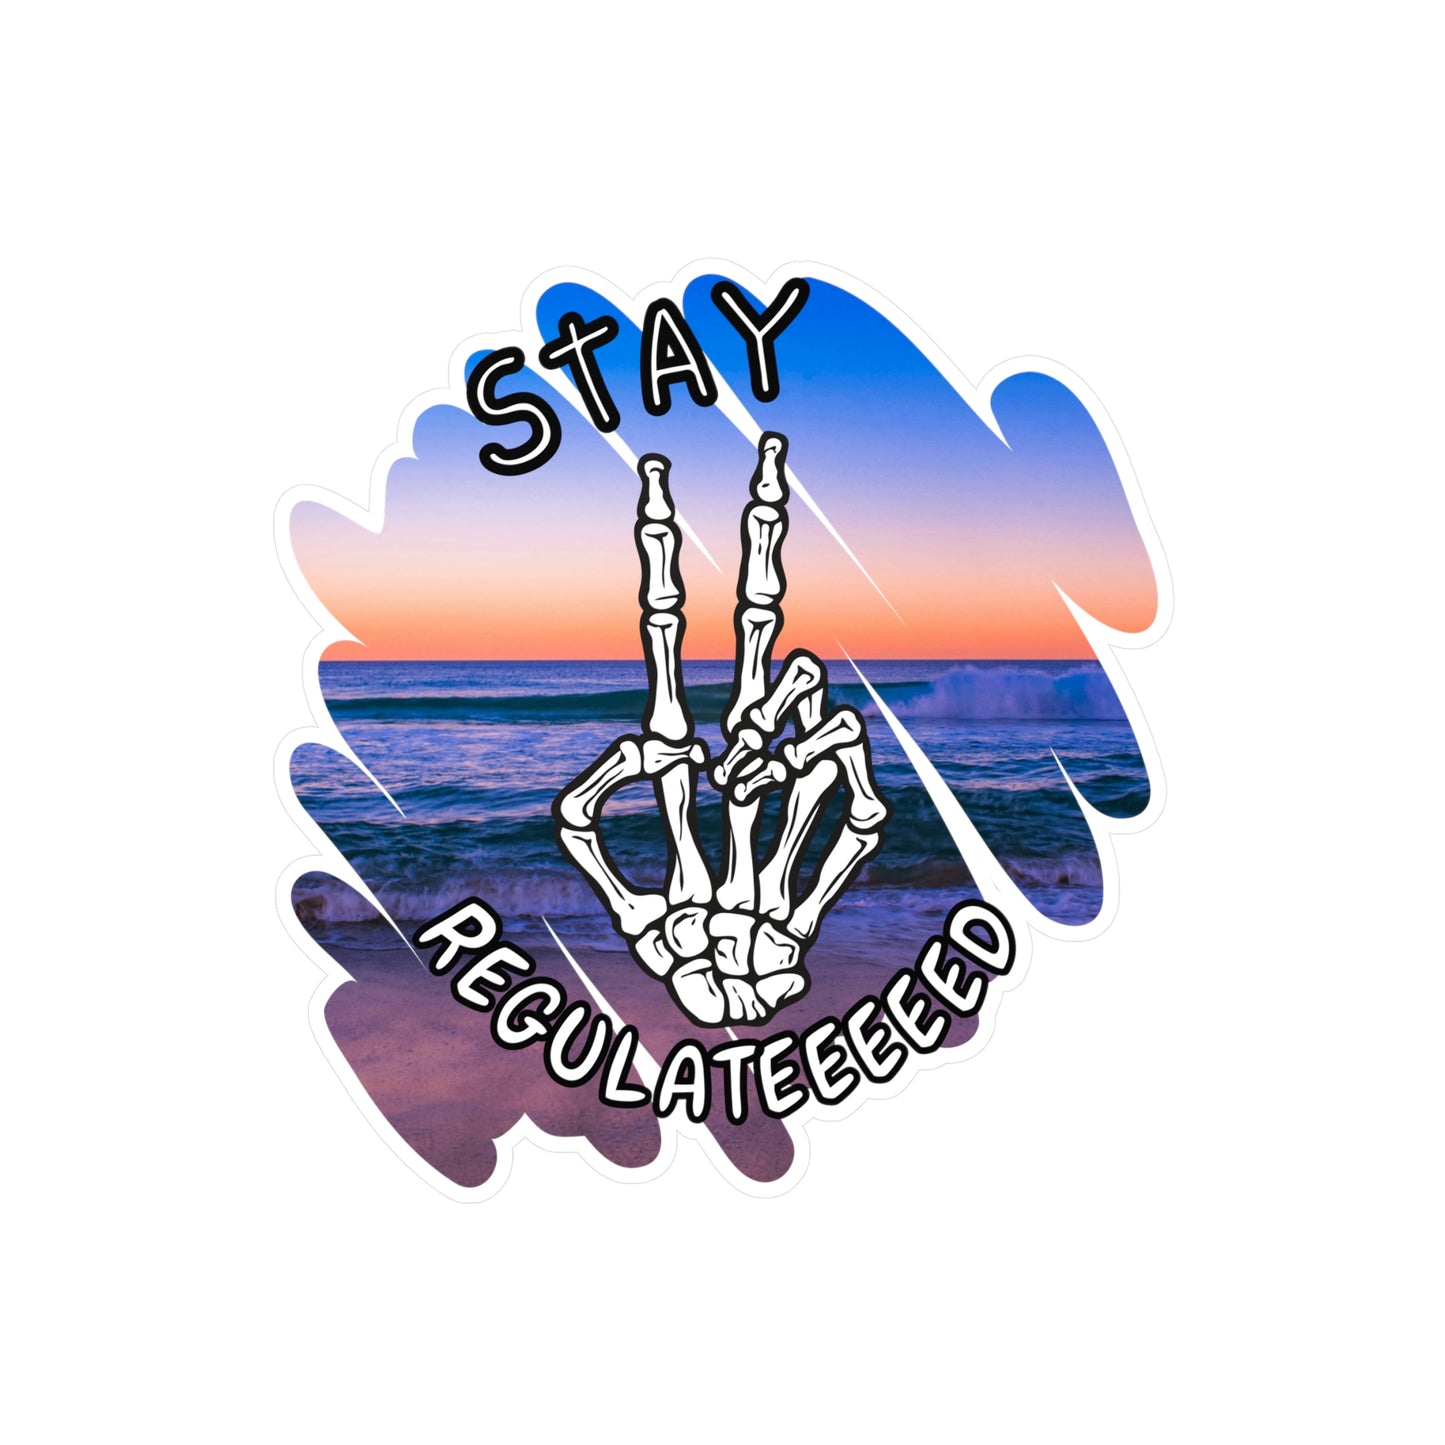 Stay Regulated [Gauthism Line] Kiss-Cut Vinyl Decals